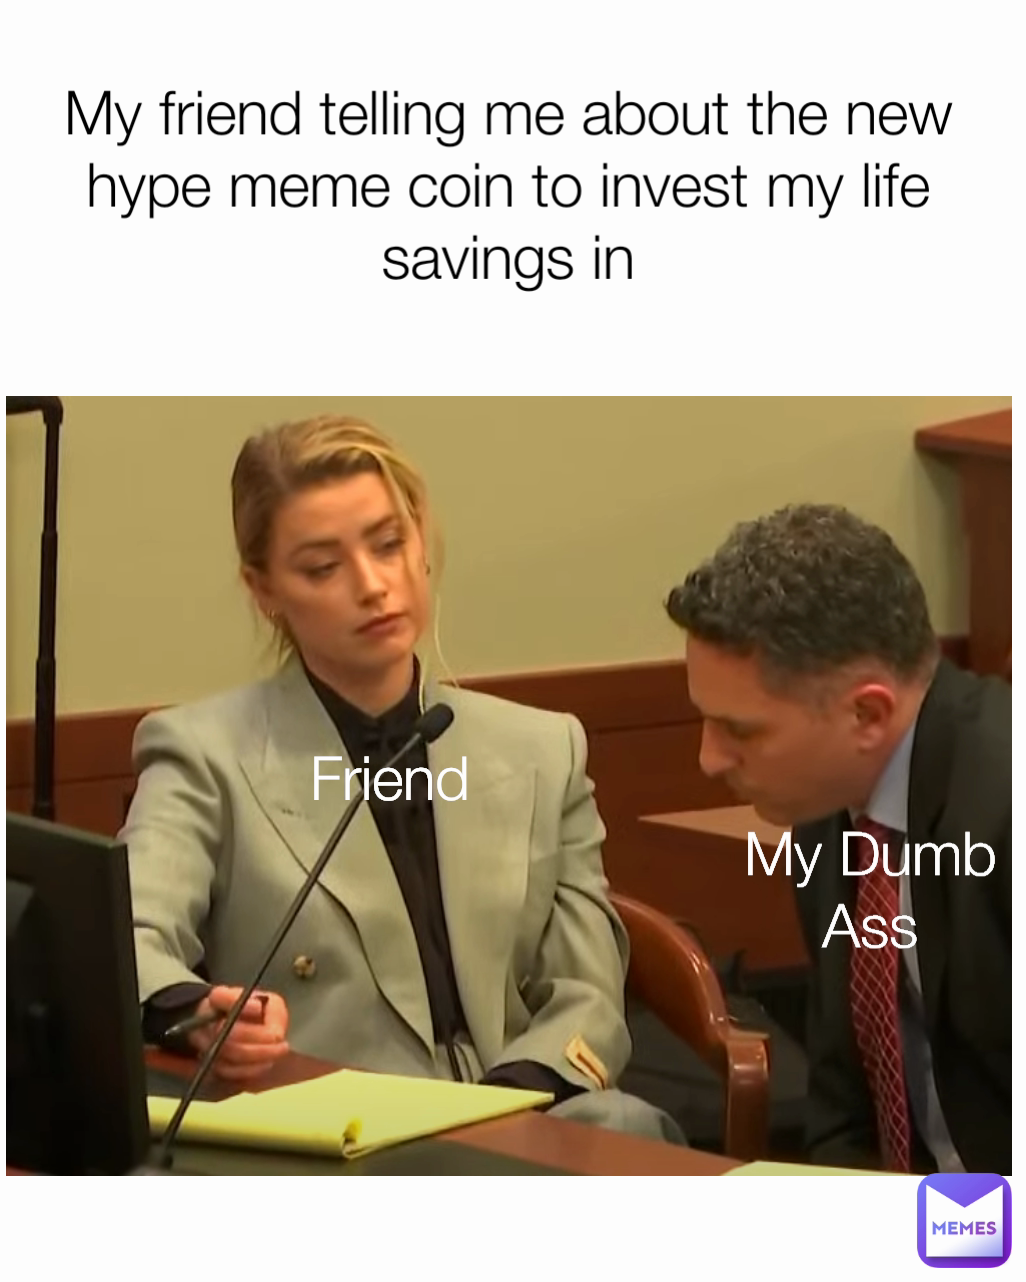 My friend telling me about the new hype meme coin to invest my life savings in Friend My Dumb Ass